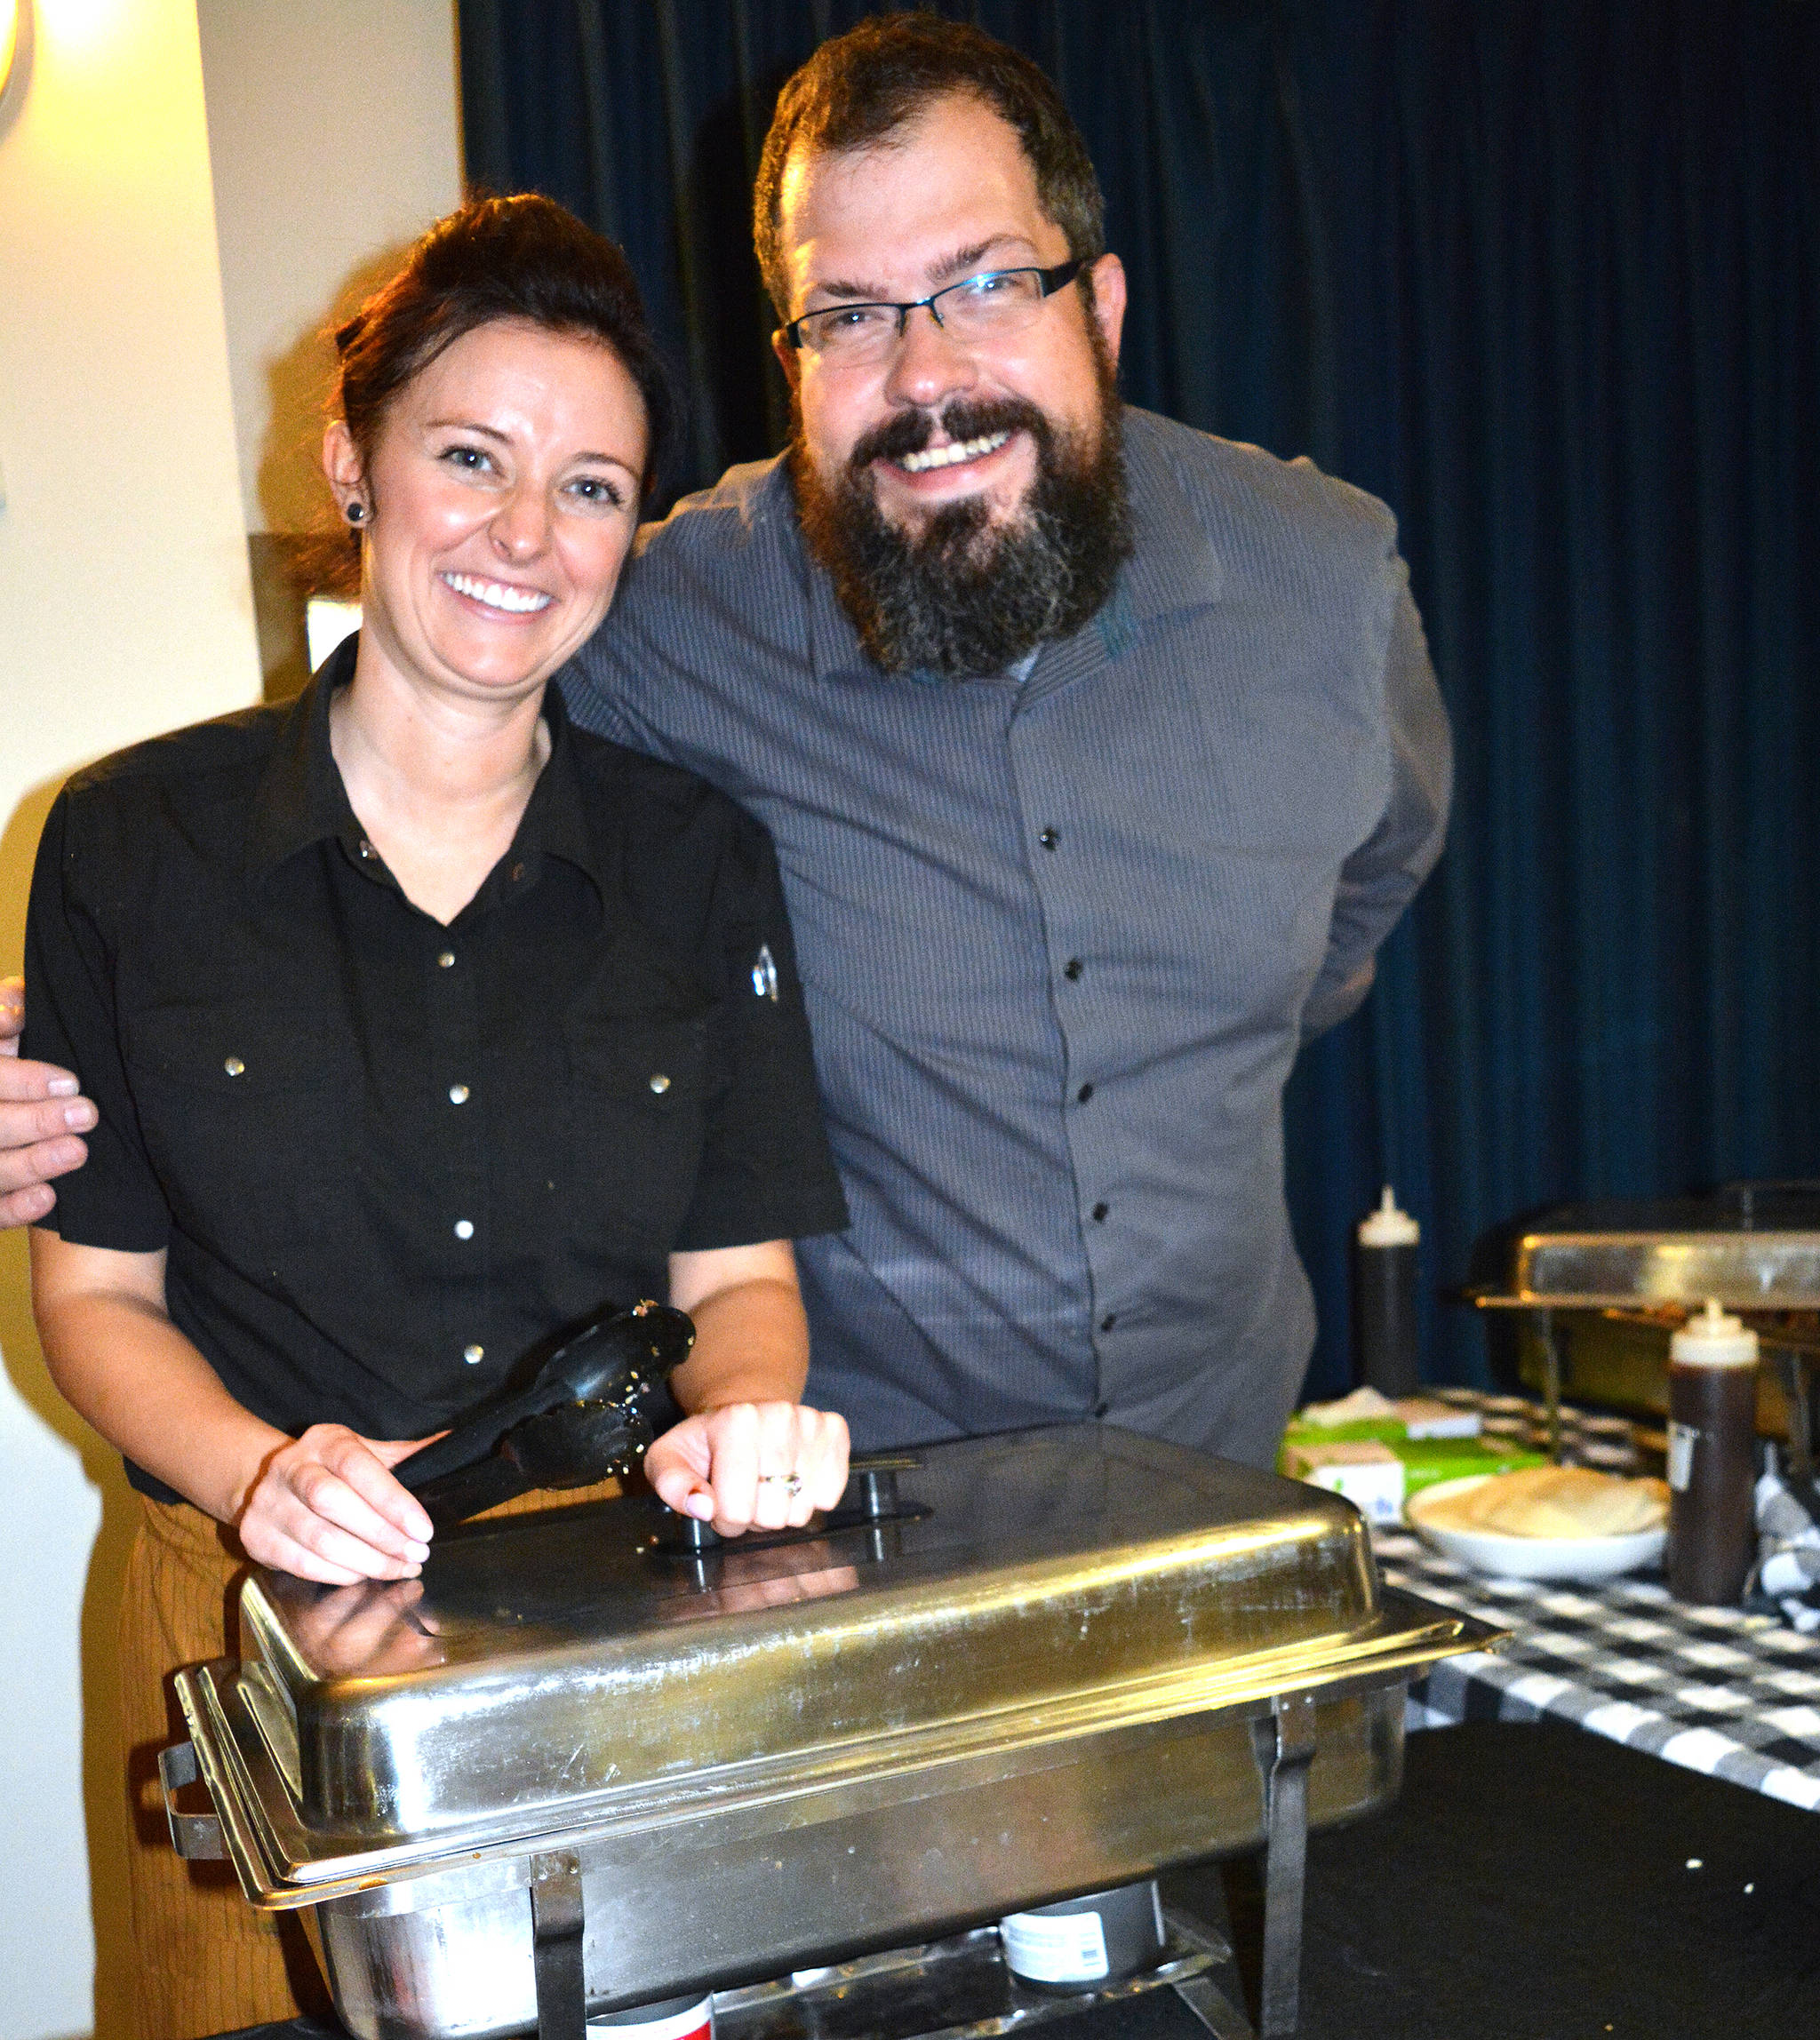 Rieley and Kaleigh from Lacombe’s family restaurant Cilantro and Chive participate in A Taste of Stettler Sept. 21. (Lisa Joy/Stettler Independent)                                Rieley and Kaleigh from Lacombe’s family restaurant Cilantro and Chive participate in A Taste of Stettler Sept. 21. (Lisa Joy/Stettler Independent)